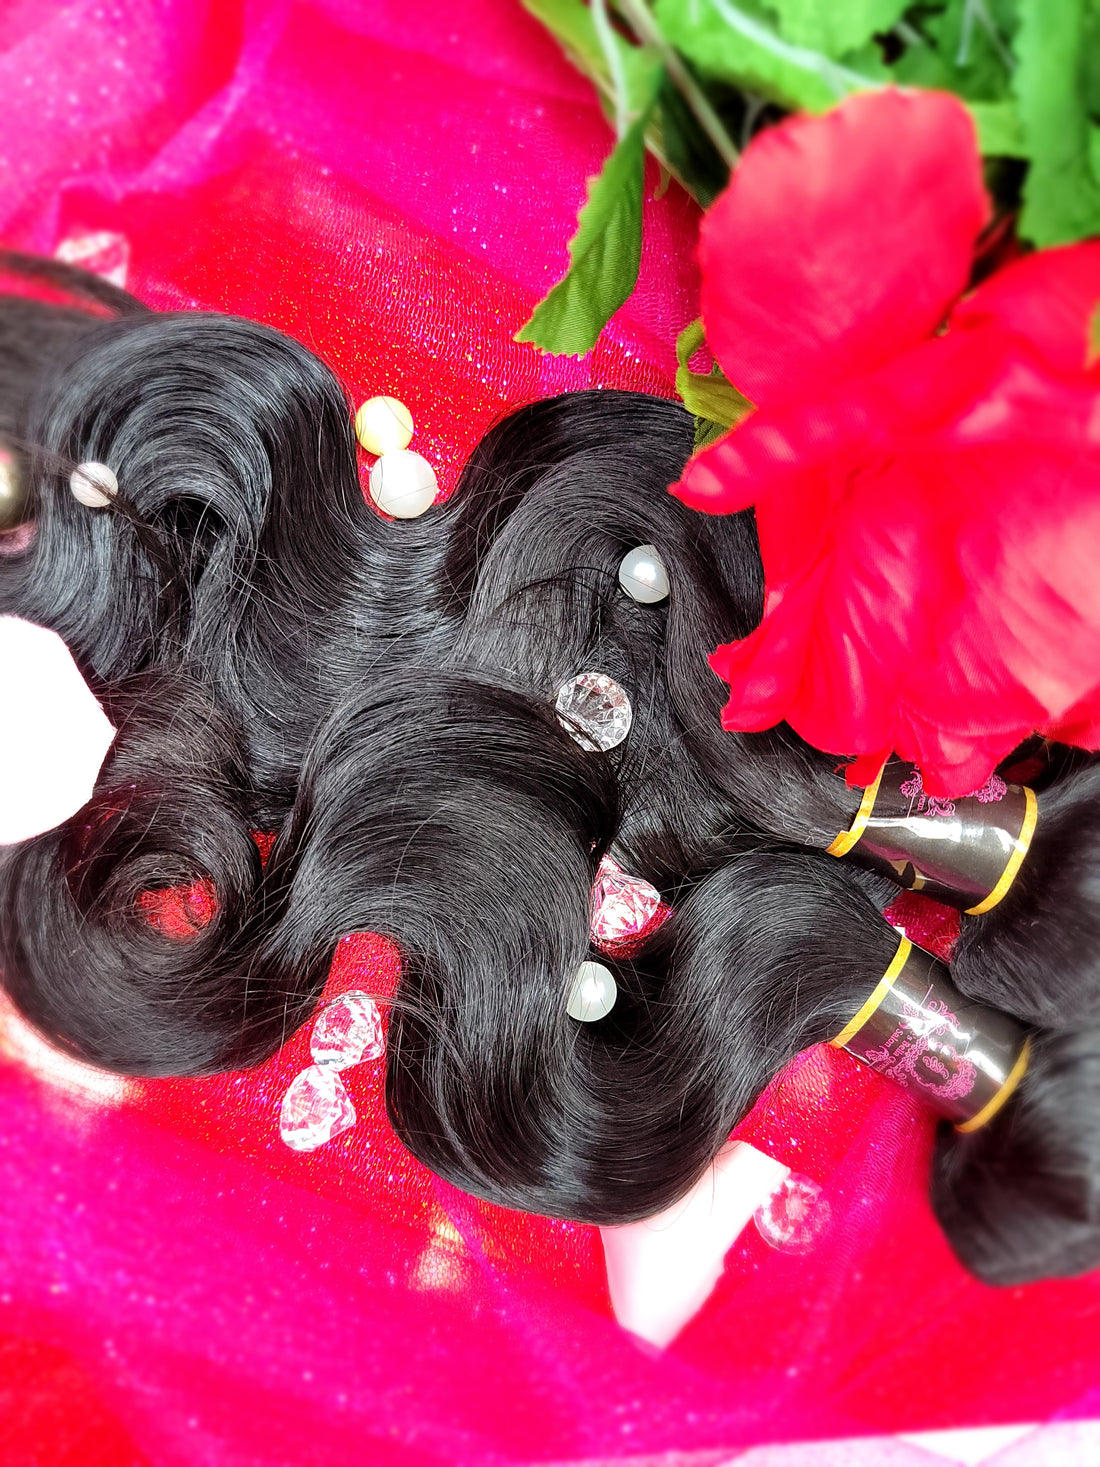 Luxurious virgin hair body wave bundles offering natural, flowing waves with a soft, silky texture, ideal for versatile hairstyling, available at our exclusive online hair extension boutique.